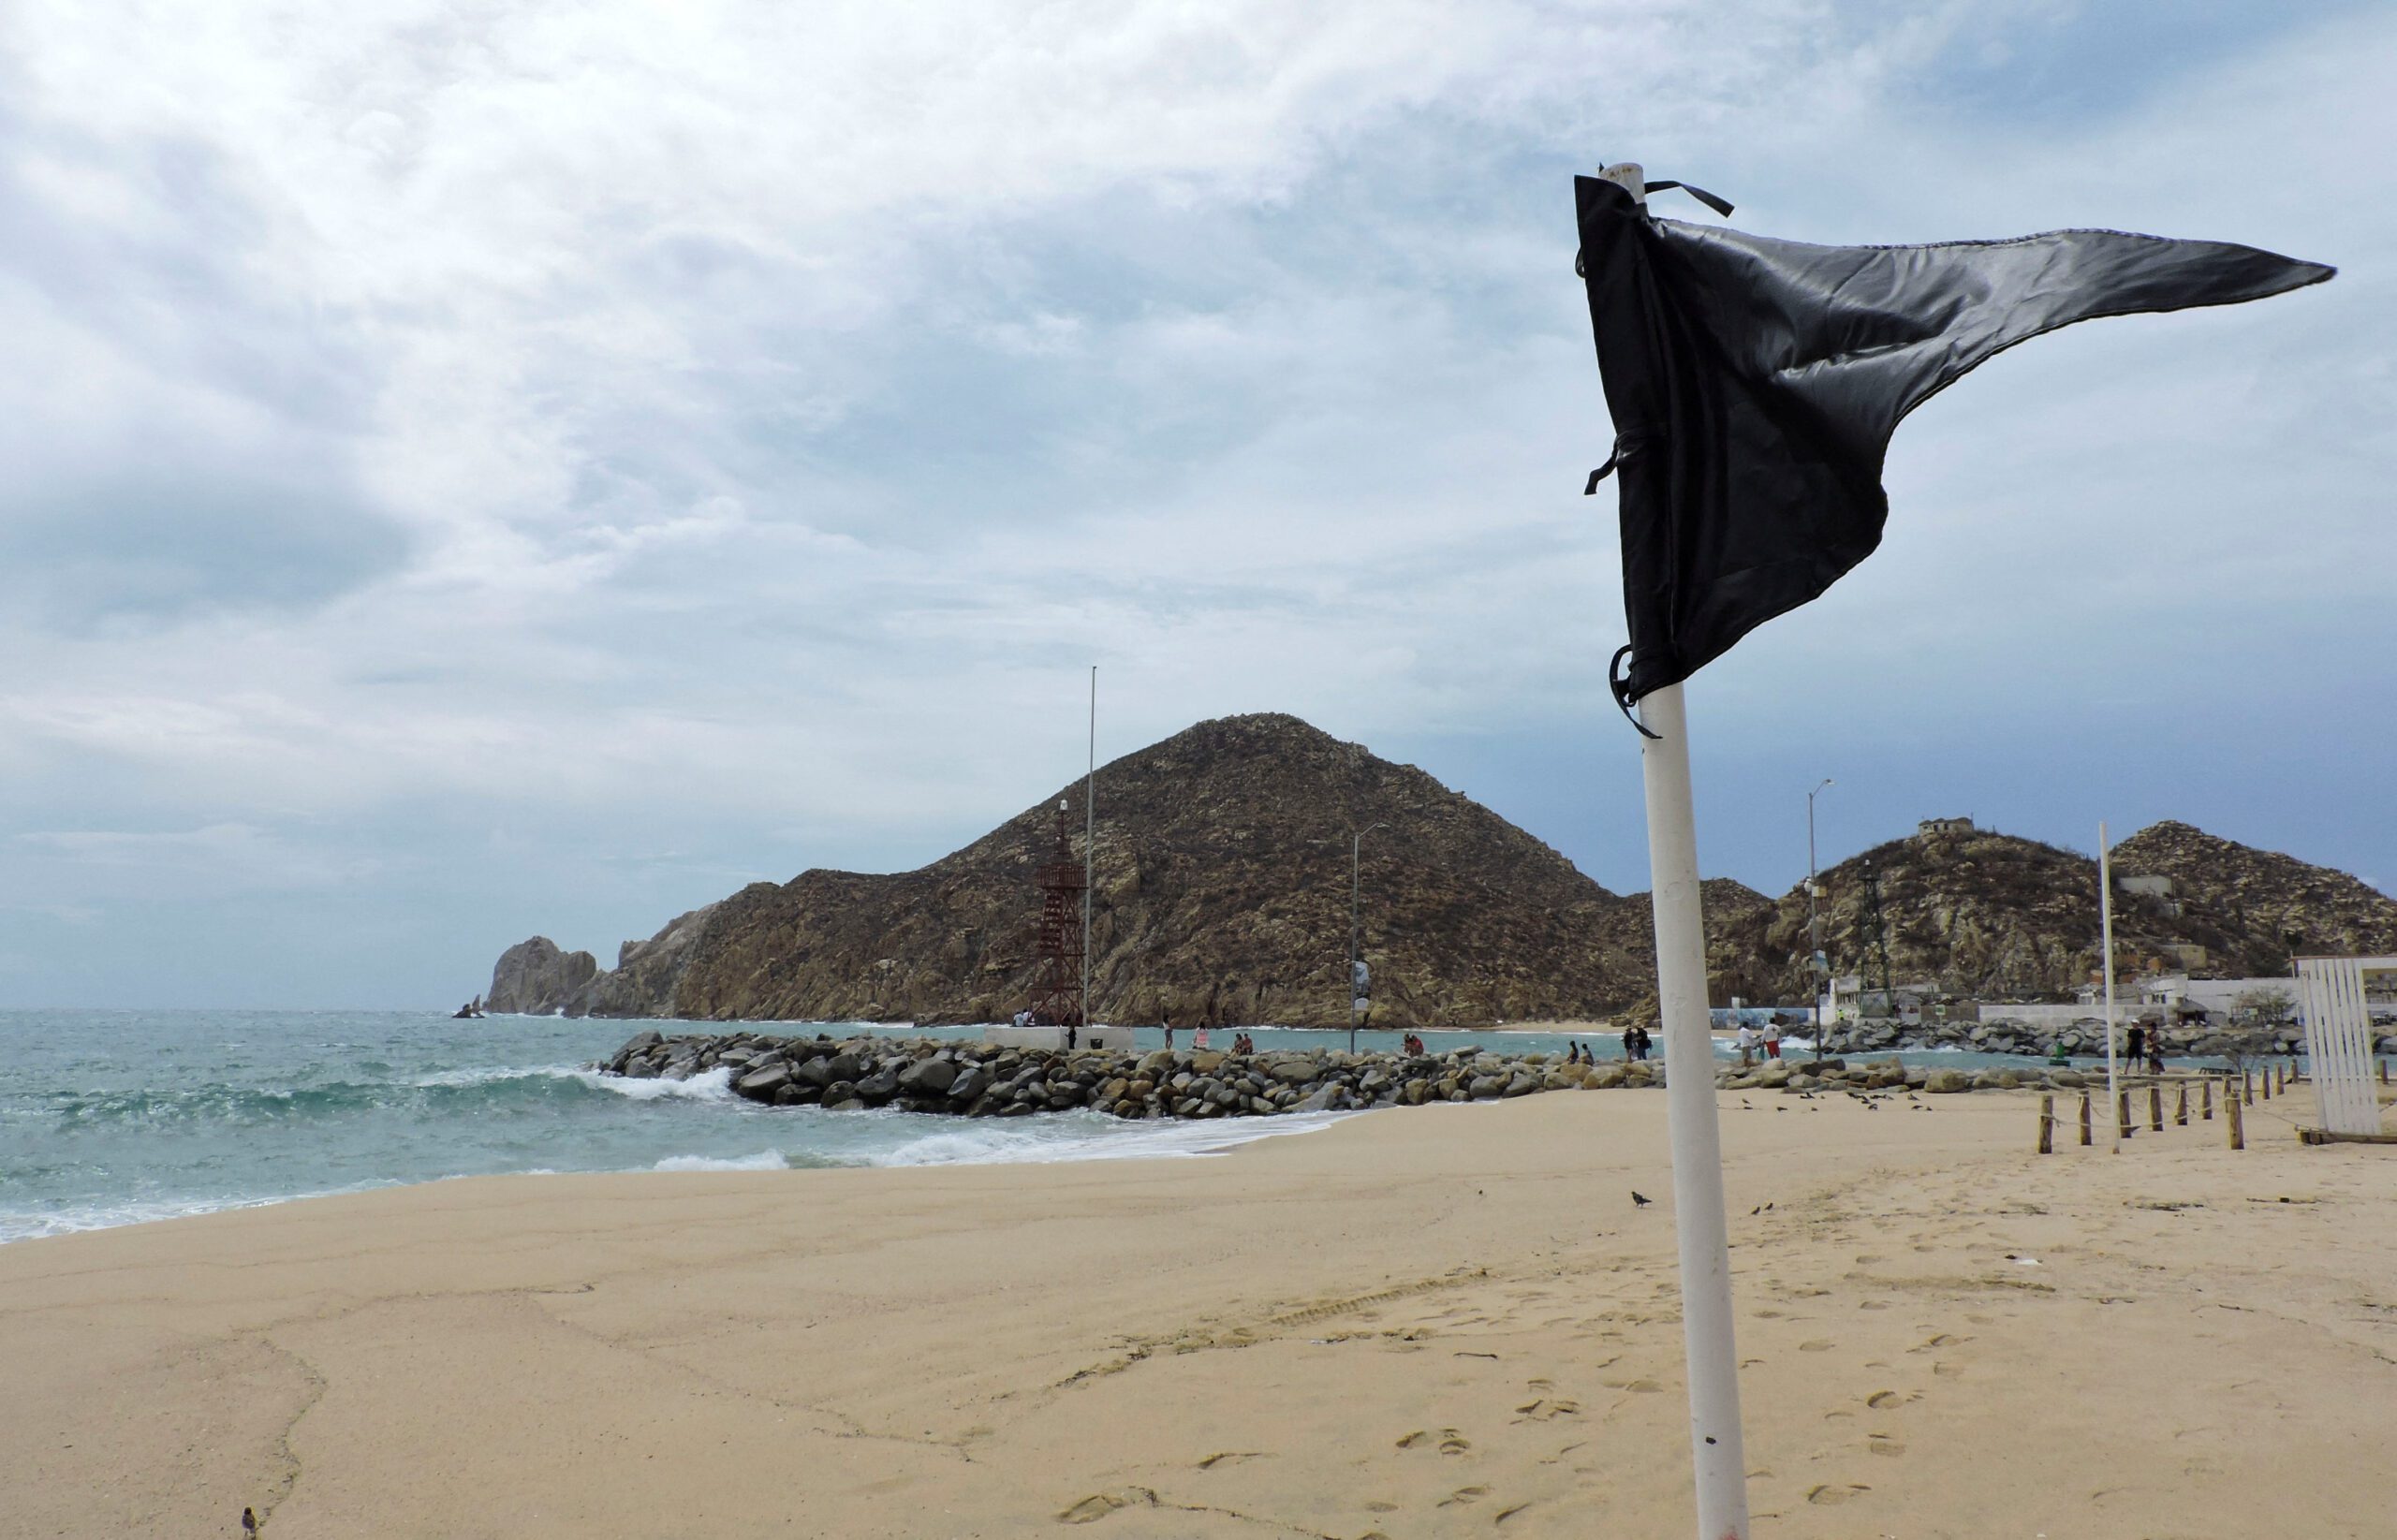 A black flag, placed to alert tourists of high waves and riptides which are unsafe for swimming, is pictured at a beach as a security measure by local authorities while the Category 4 Hurricane Hilary rushes toward Mexico's Baja California peninsula, in Cabo San Lucas, Mexico August 18, 2023. Photo via REUTERS/Monserrat Zavala